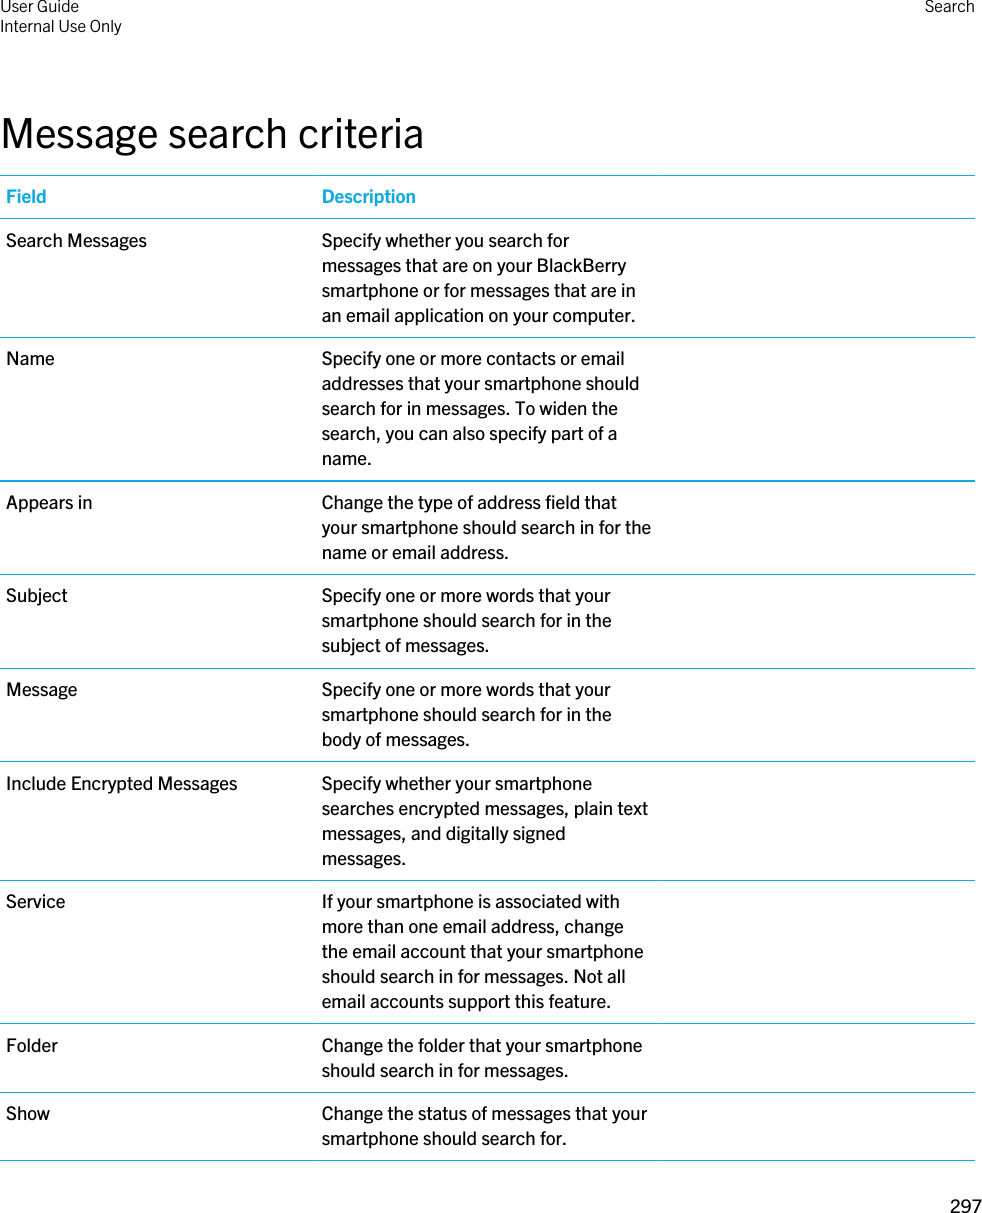 Message search criteriaField DescriptionSearch Messages Specify whether you search for messages that are on your BlackBerry smartphone or for messages that are in an email application on your computer.Name Specify one or more contacts or email addresses that your smartphone should search for in messages. To widen the search, you can also specify part of a name.Appears in Change the type of address field that your smartphone should search in for the name or email address.Subject Specify one or more words that your smartphone should search for in the subject of messages.Message Specify one or more words that your smartphone should search for in the body of messages.Include Encrypted Messages Specify whether your smartphone searches encrypted messages, plain text messages, and digitally signed messages.Service If your smartphone is associated with more than one email address, change the email account that your smartphone should search in for messages. Not all email accounts support this feature.Folder Change the folder that your smartphone should search in for messages.Show Change the status of messages that your smartphone should search for.User GuideInternal Use Only Search297 